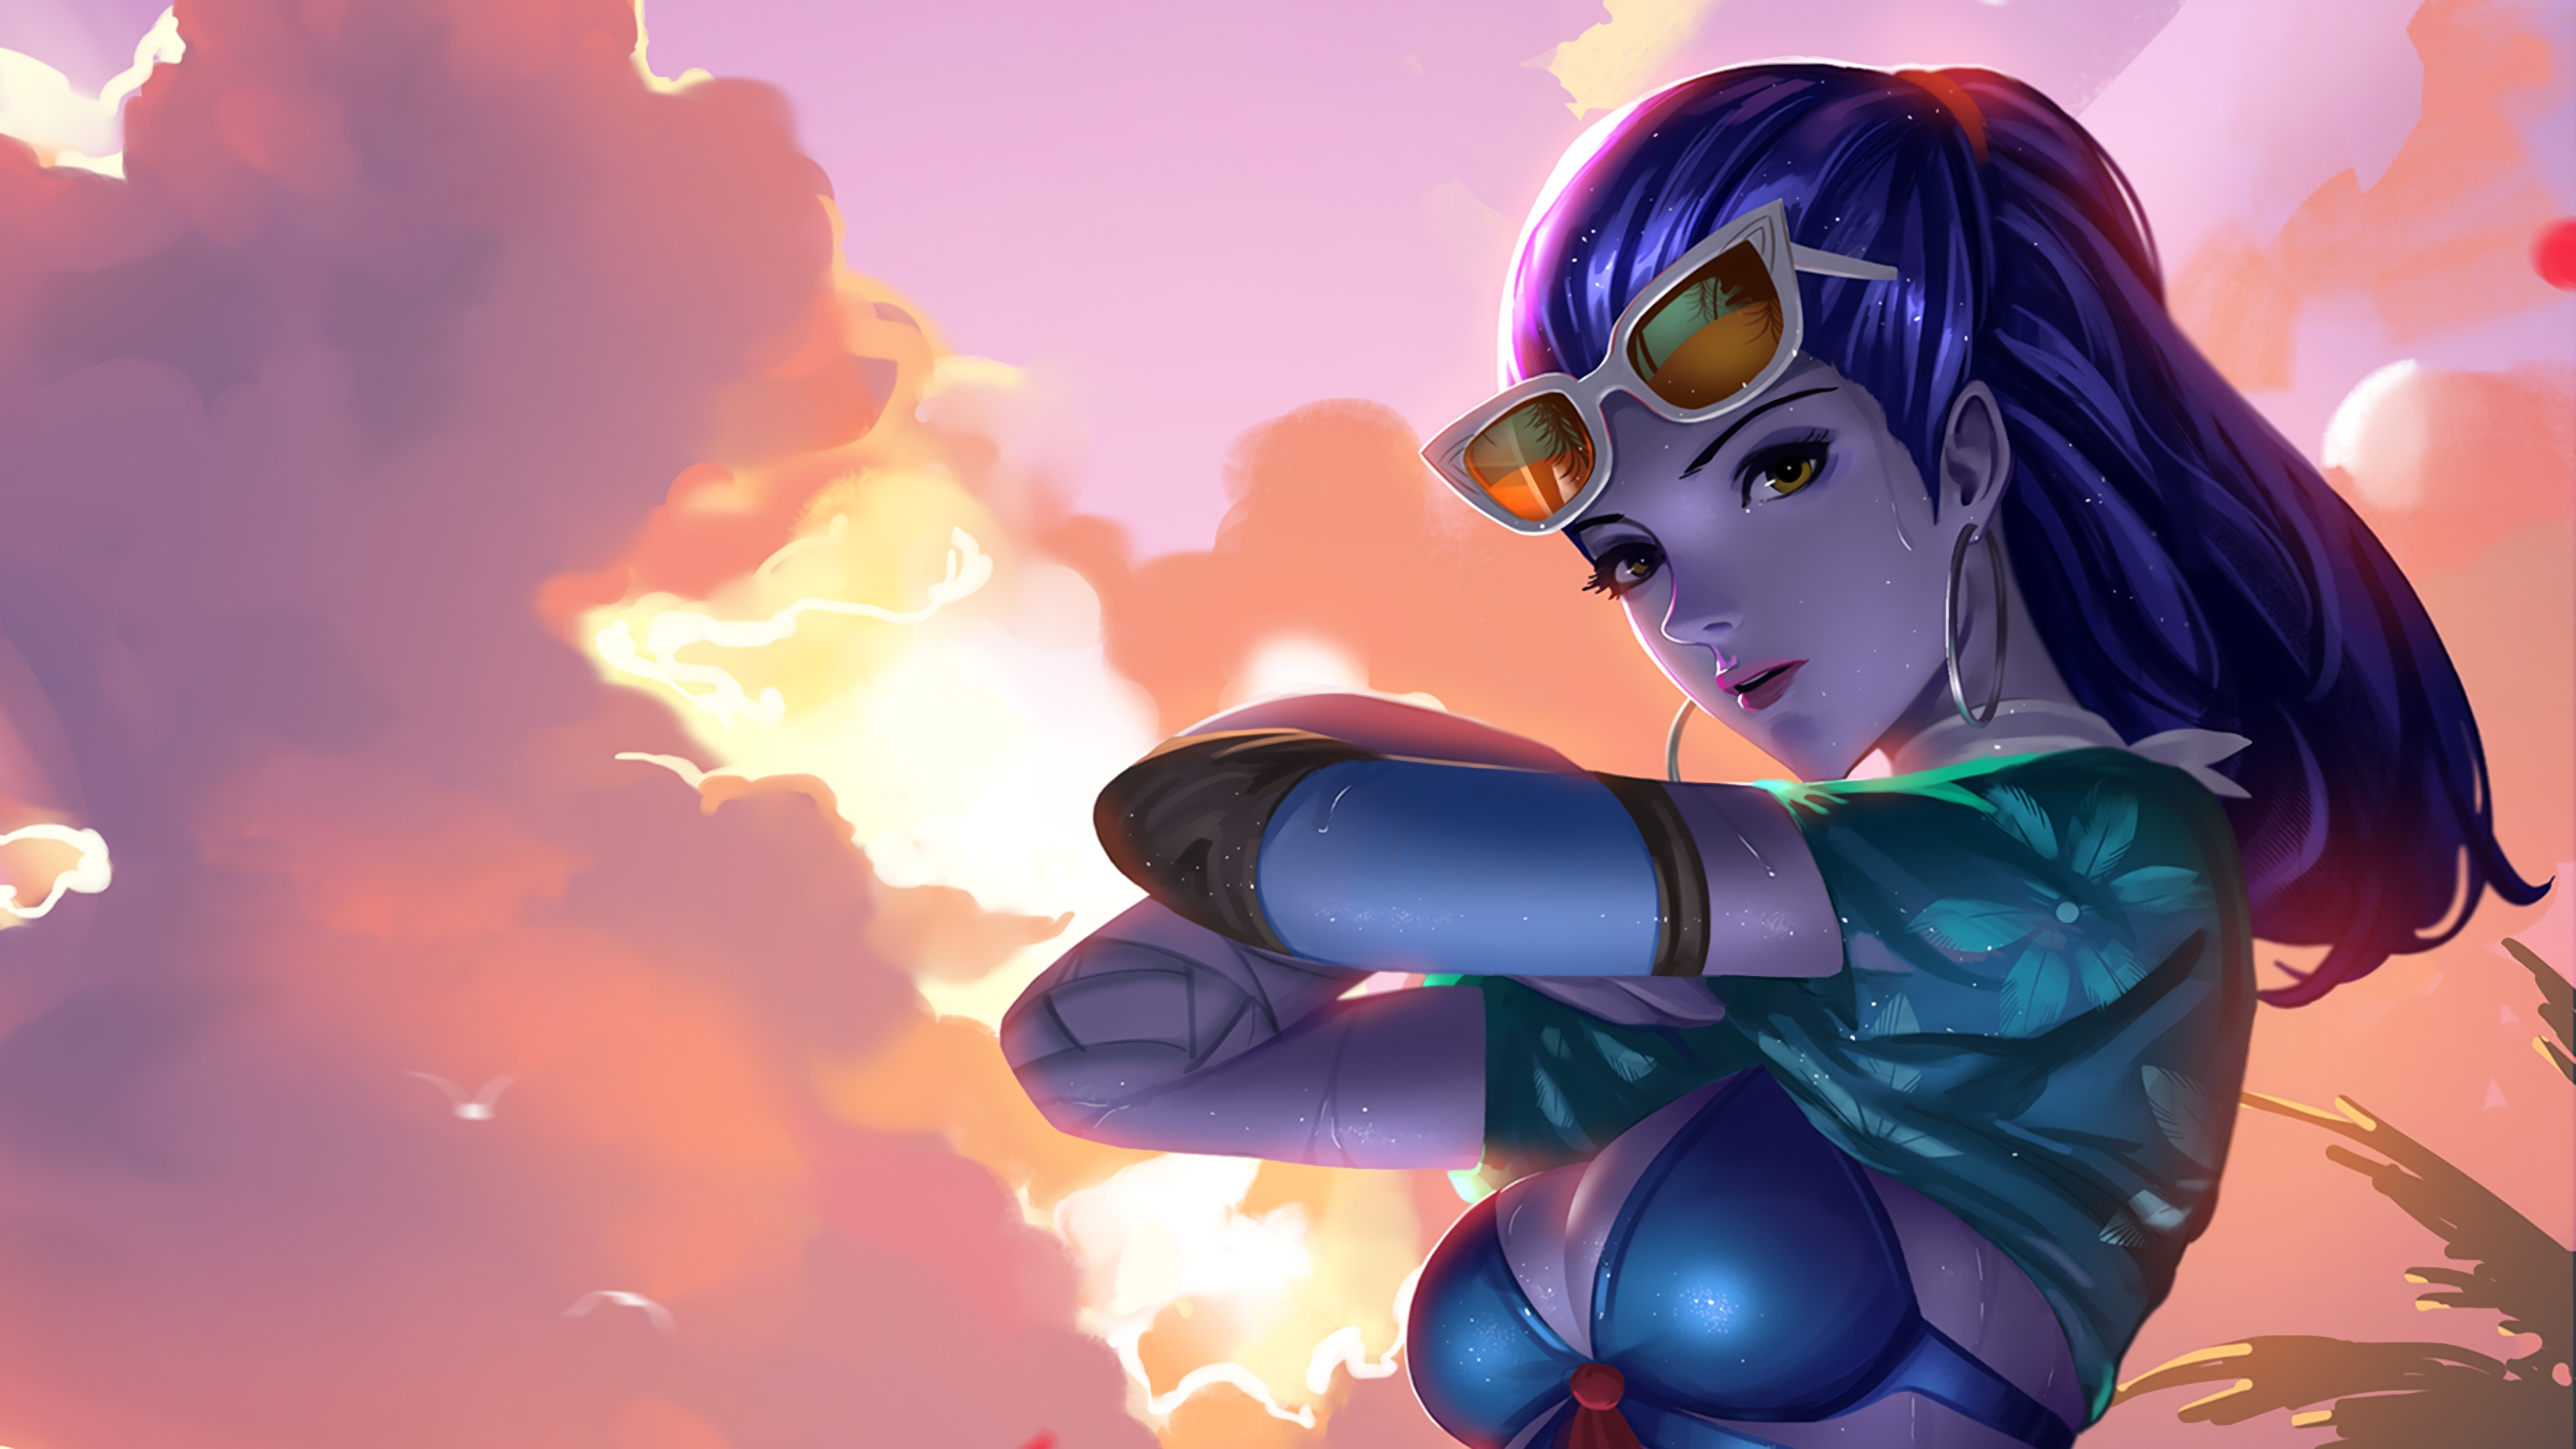 3840x2160 230+ Widowmaker (Overwatch) HD Wallpapers and Backgrounds